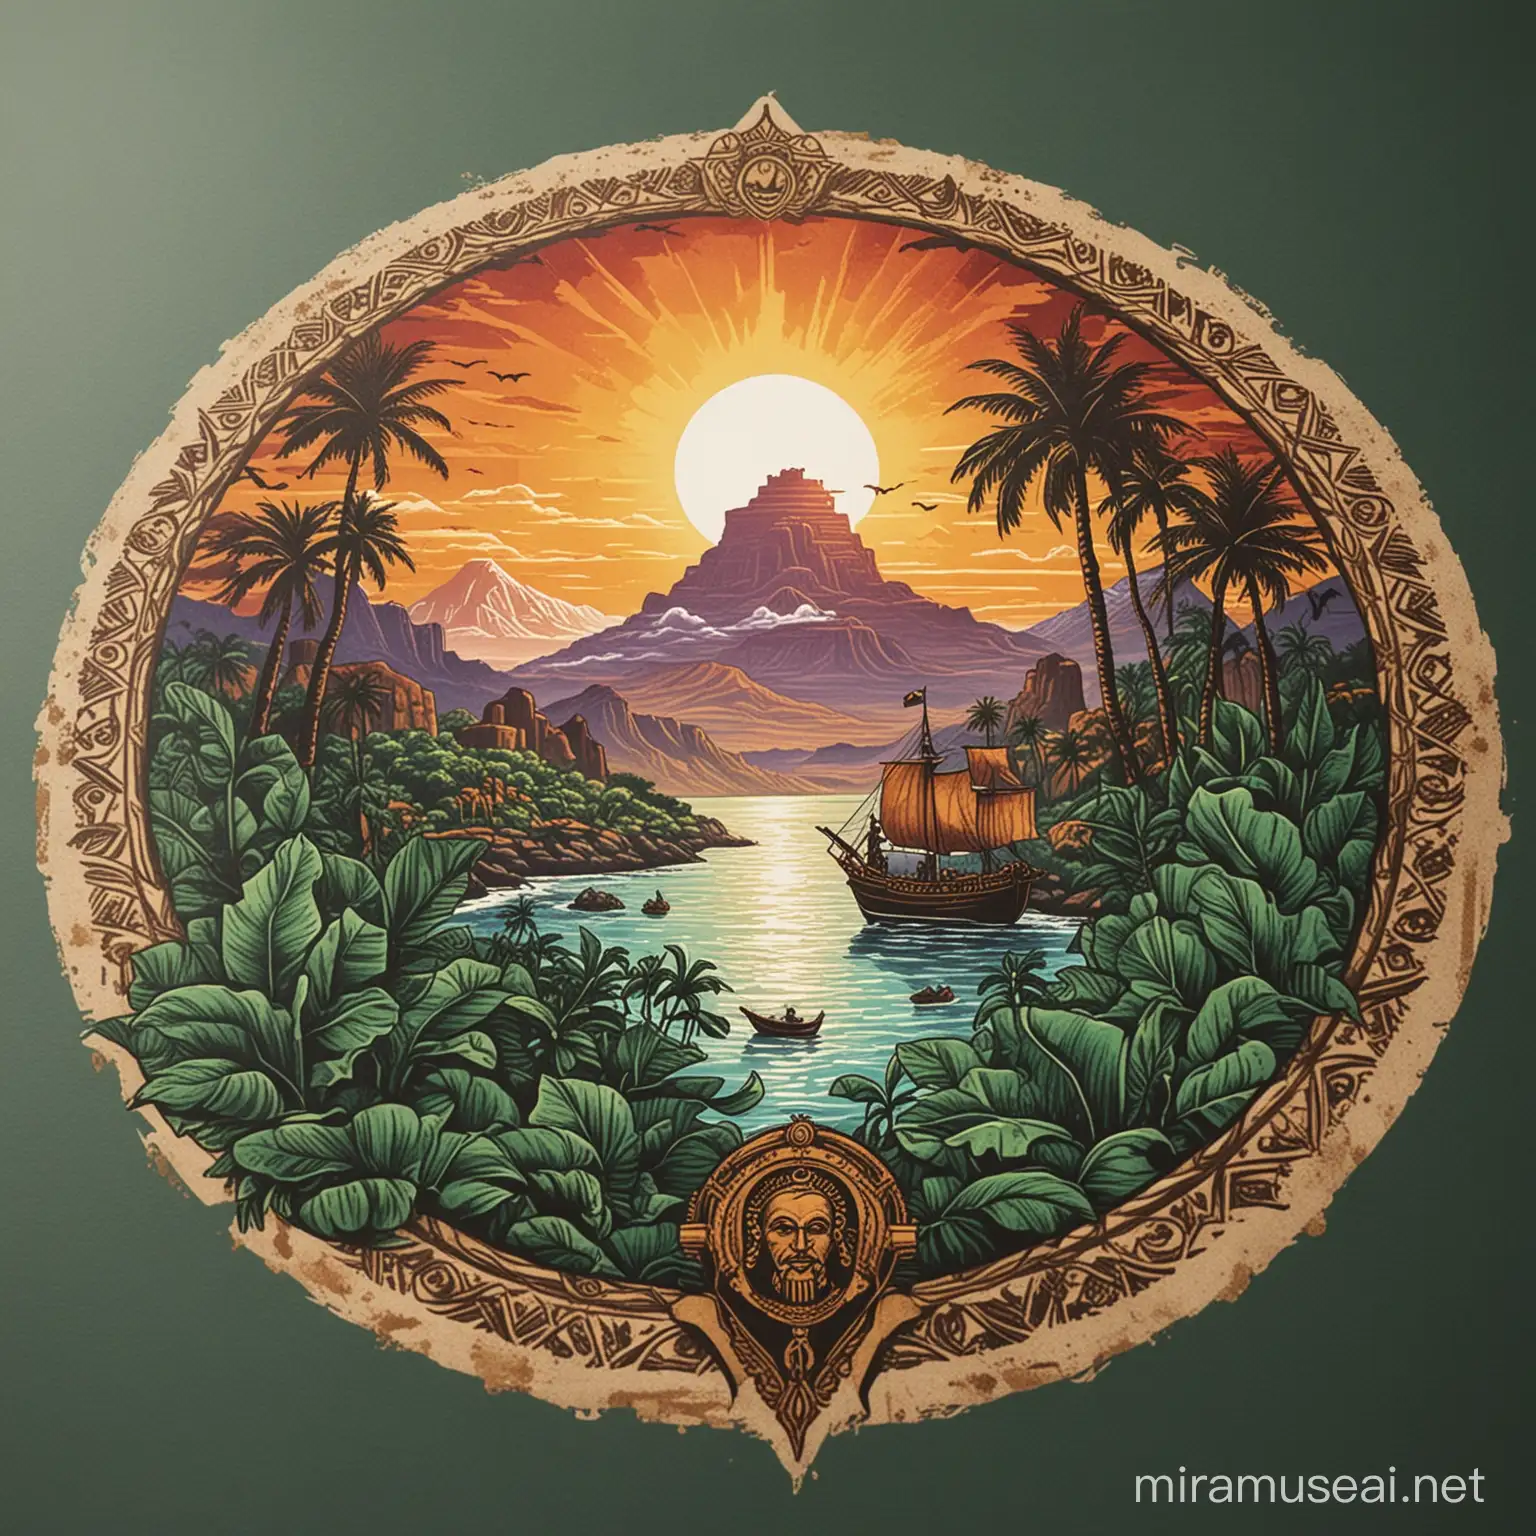 Vibrant Indian Spice Palette with Maui Mountains and Pirate Ship in Ocean Sunrise